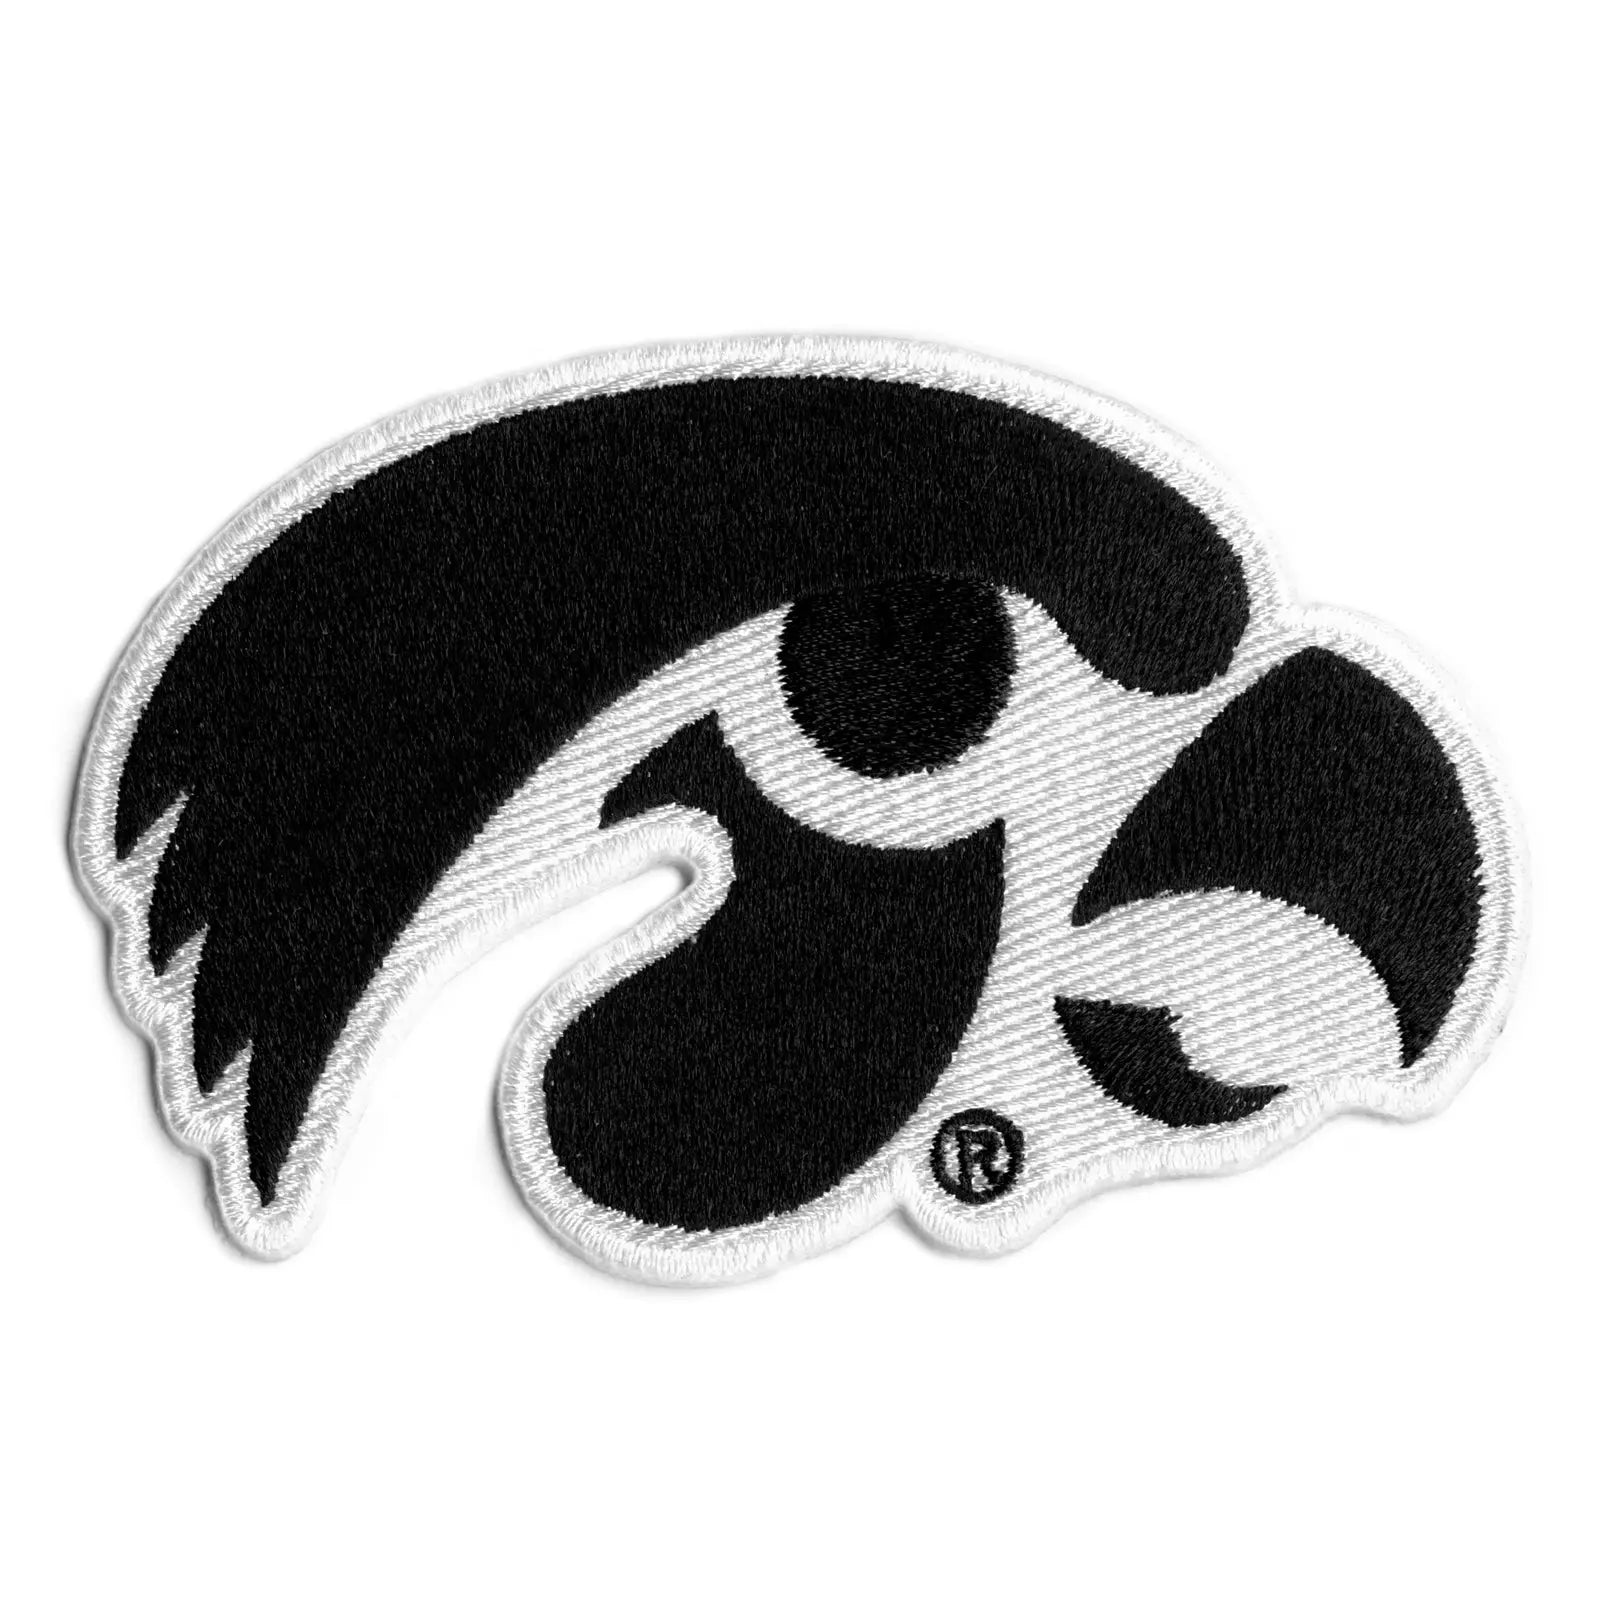 Iowa Hawkeyes Black and White Primary Logo Embroidered Iron on Patch M